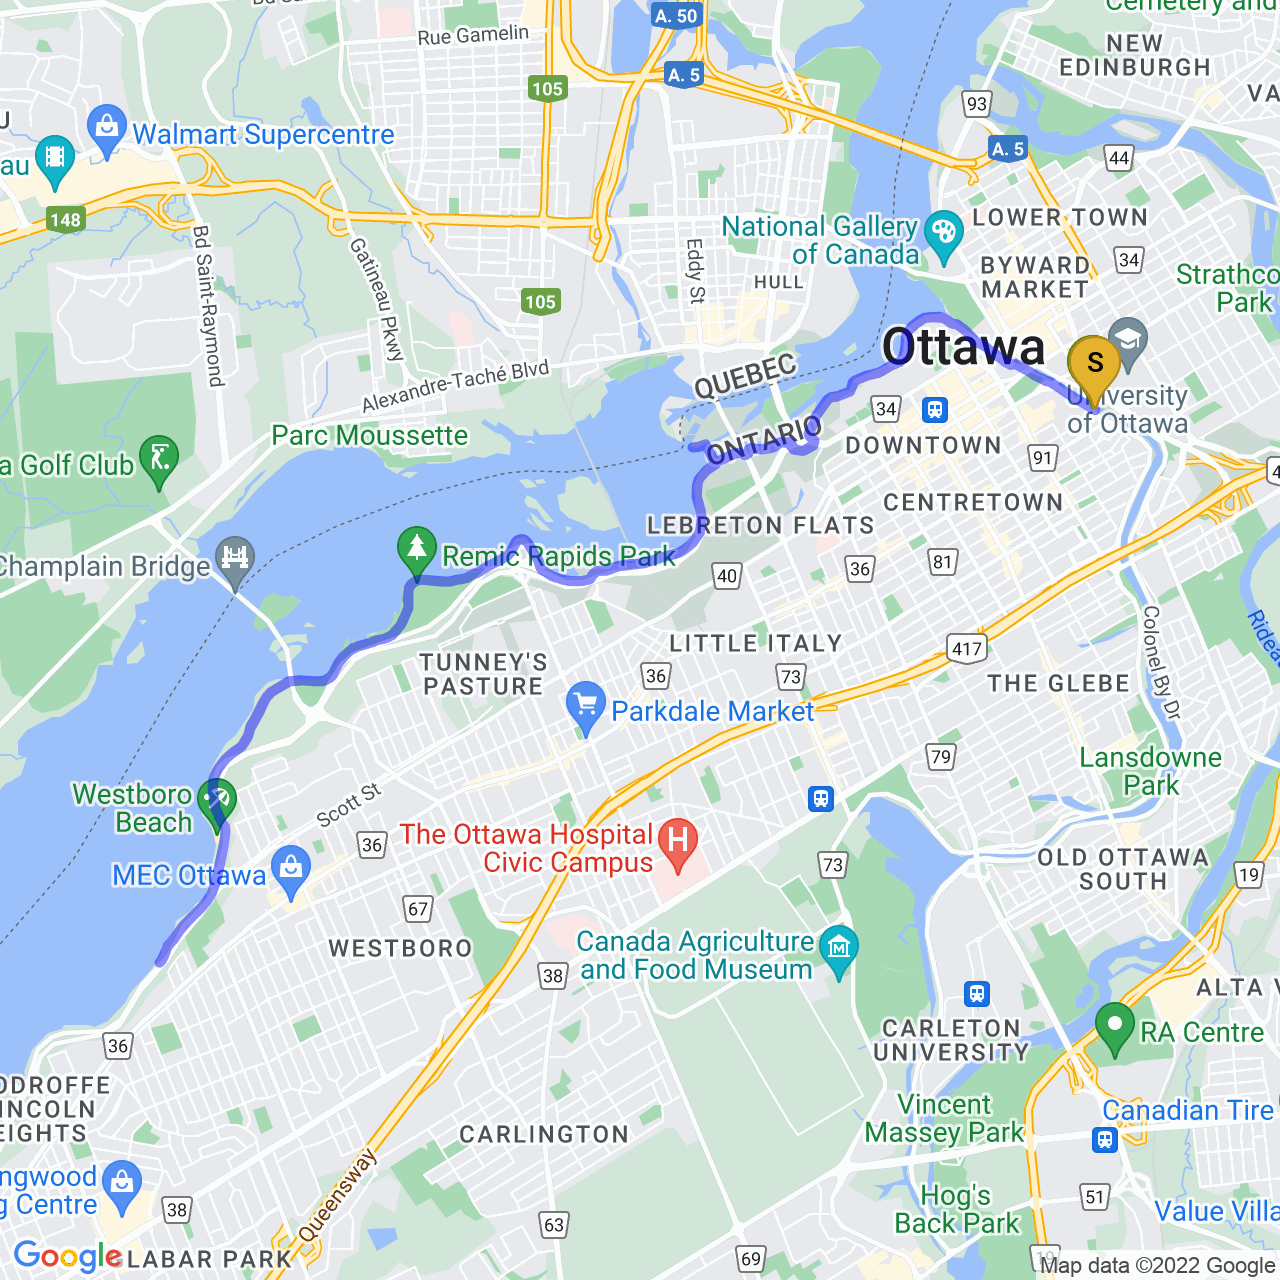 map of new tires - first ride!